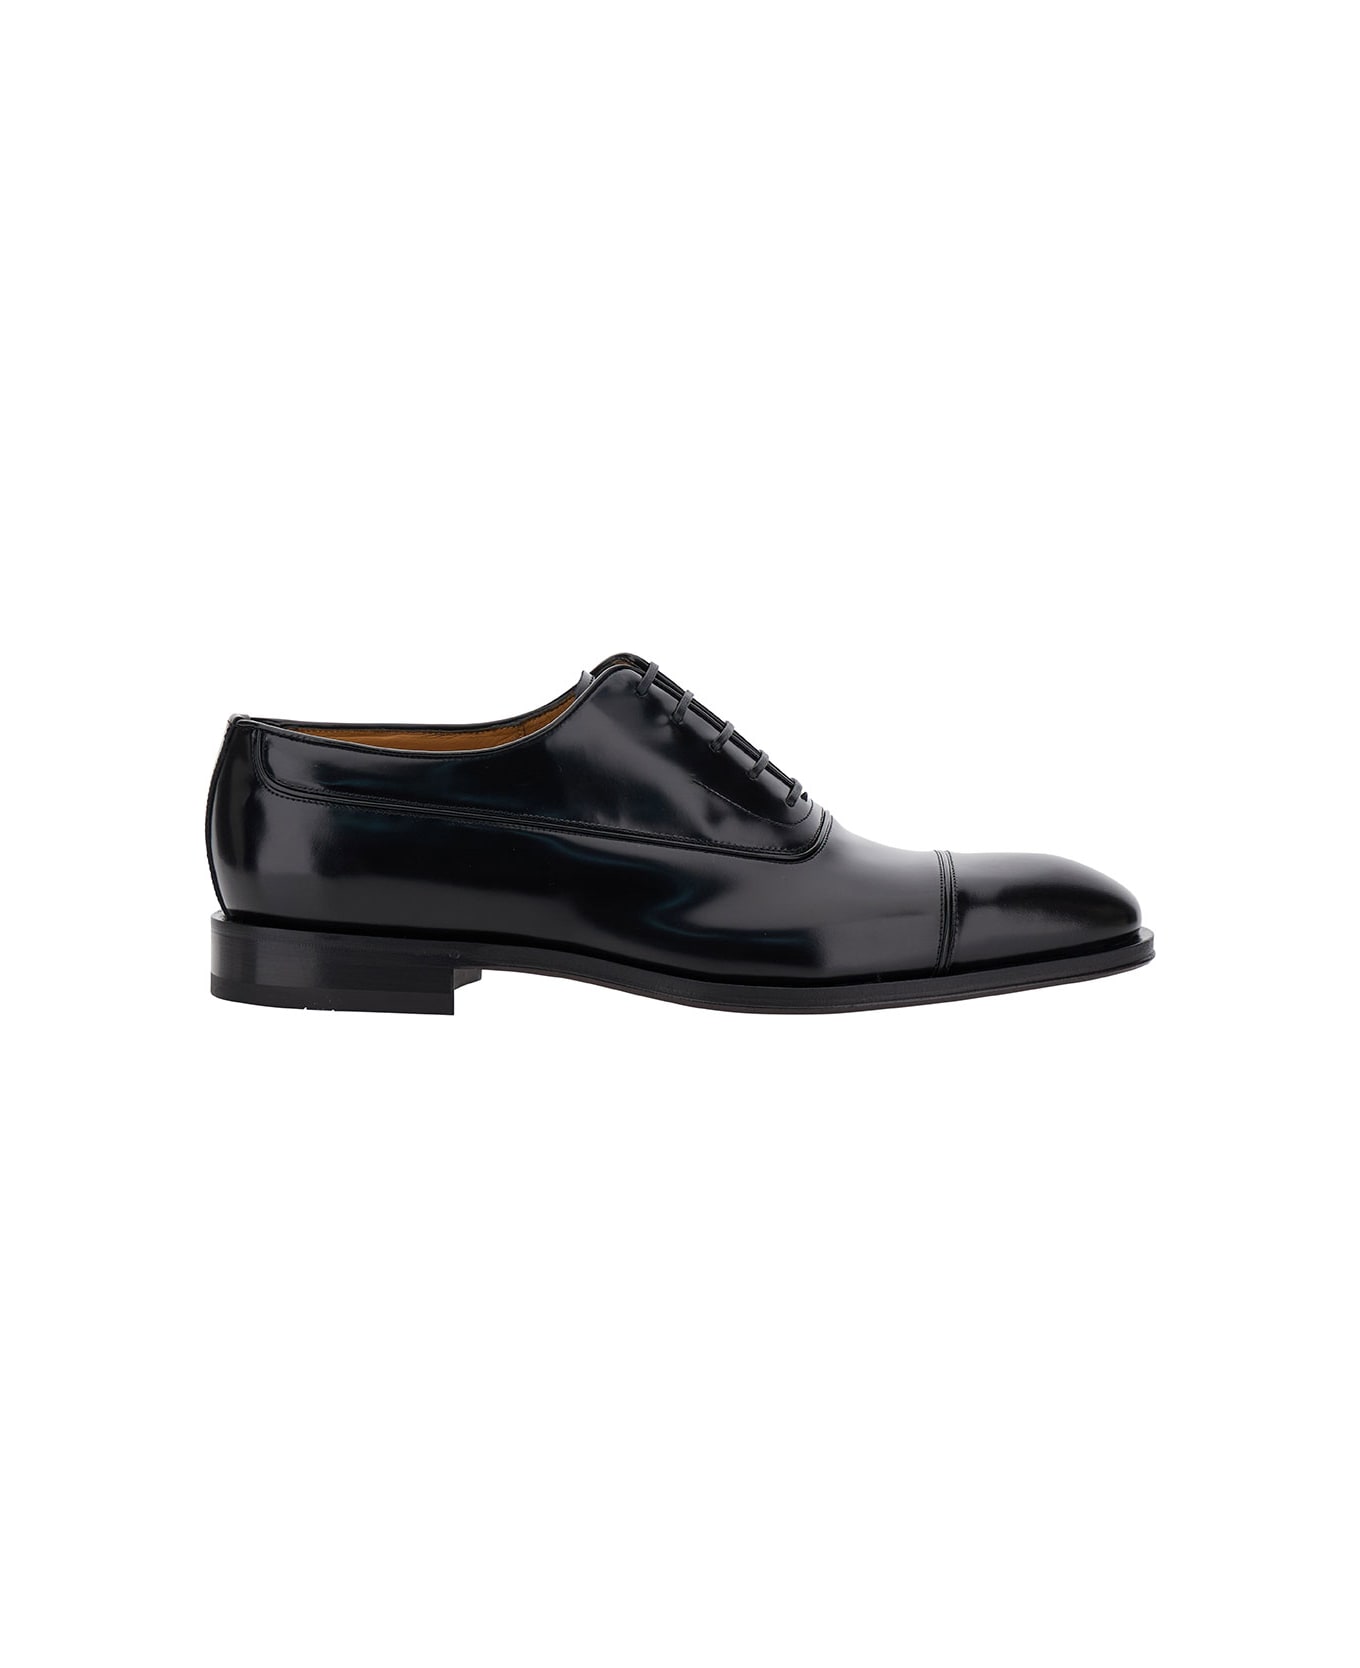 Ferragamo Black Oxford Lace-up With Toe Cap Detail In Brushed Leather Man - Black